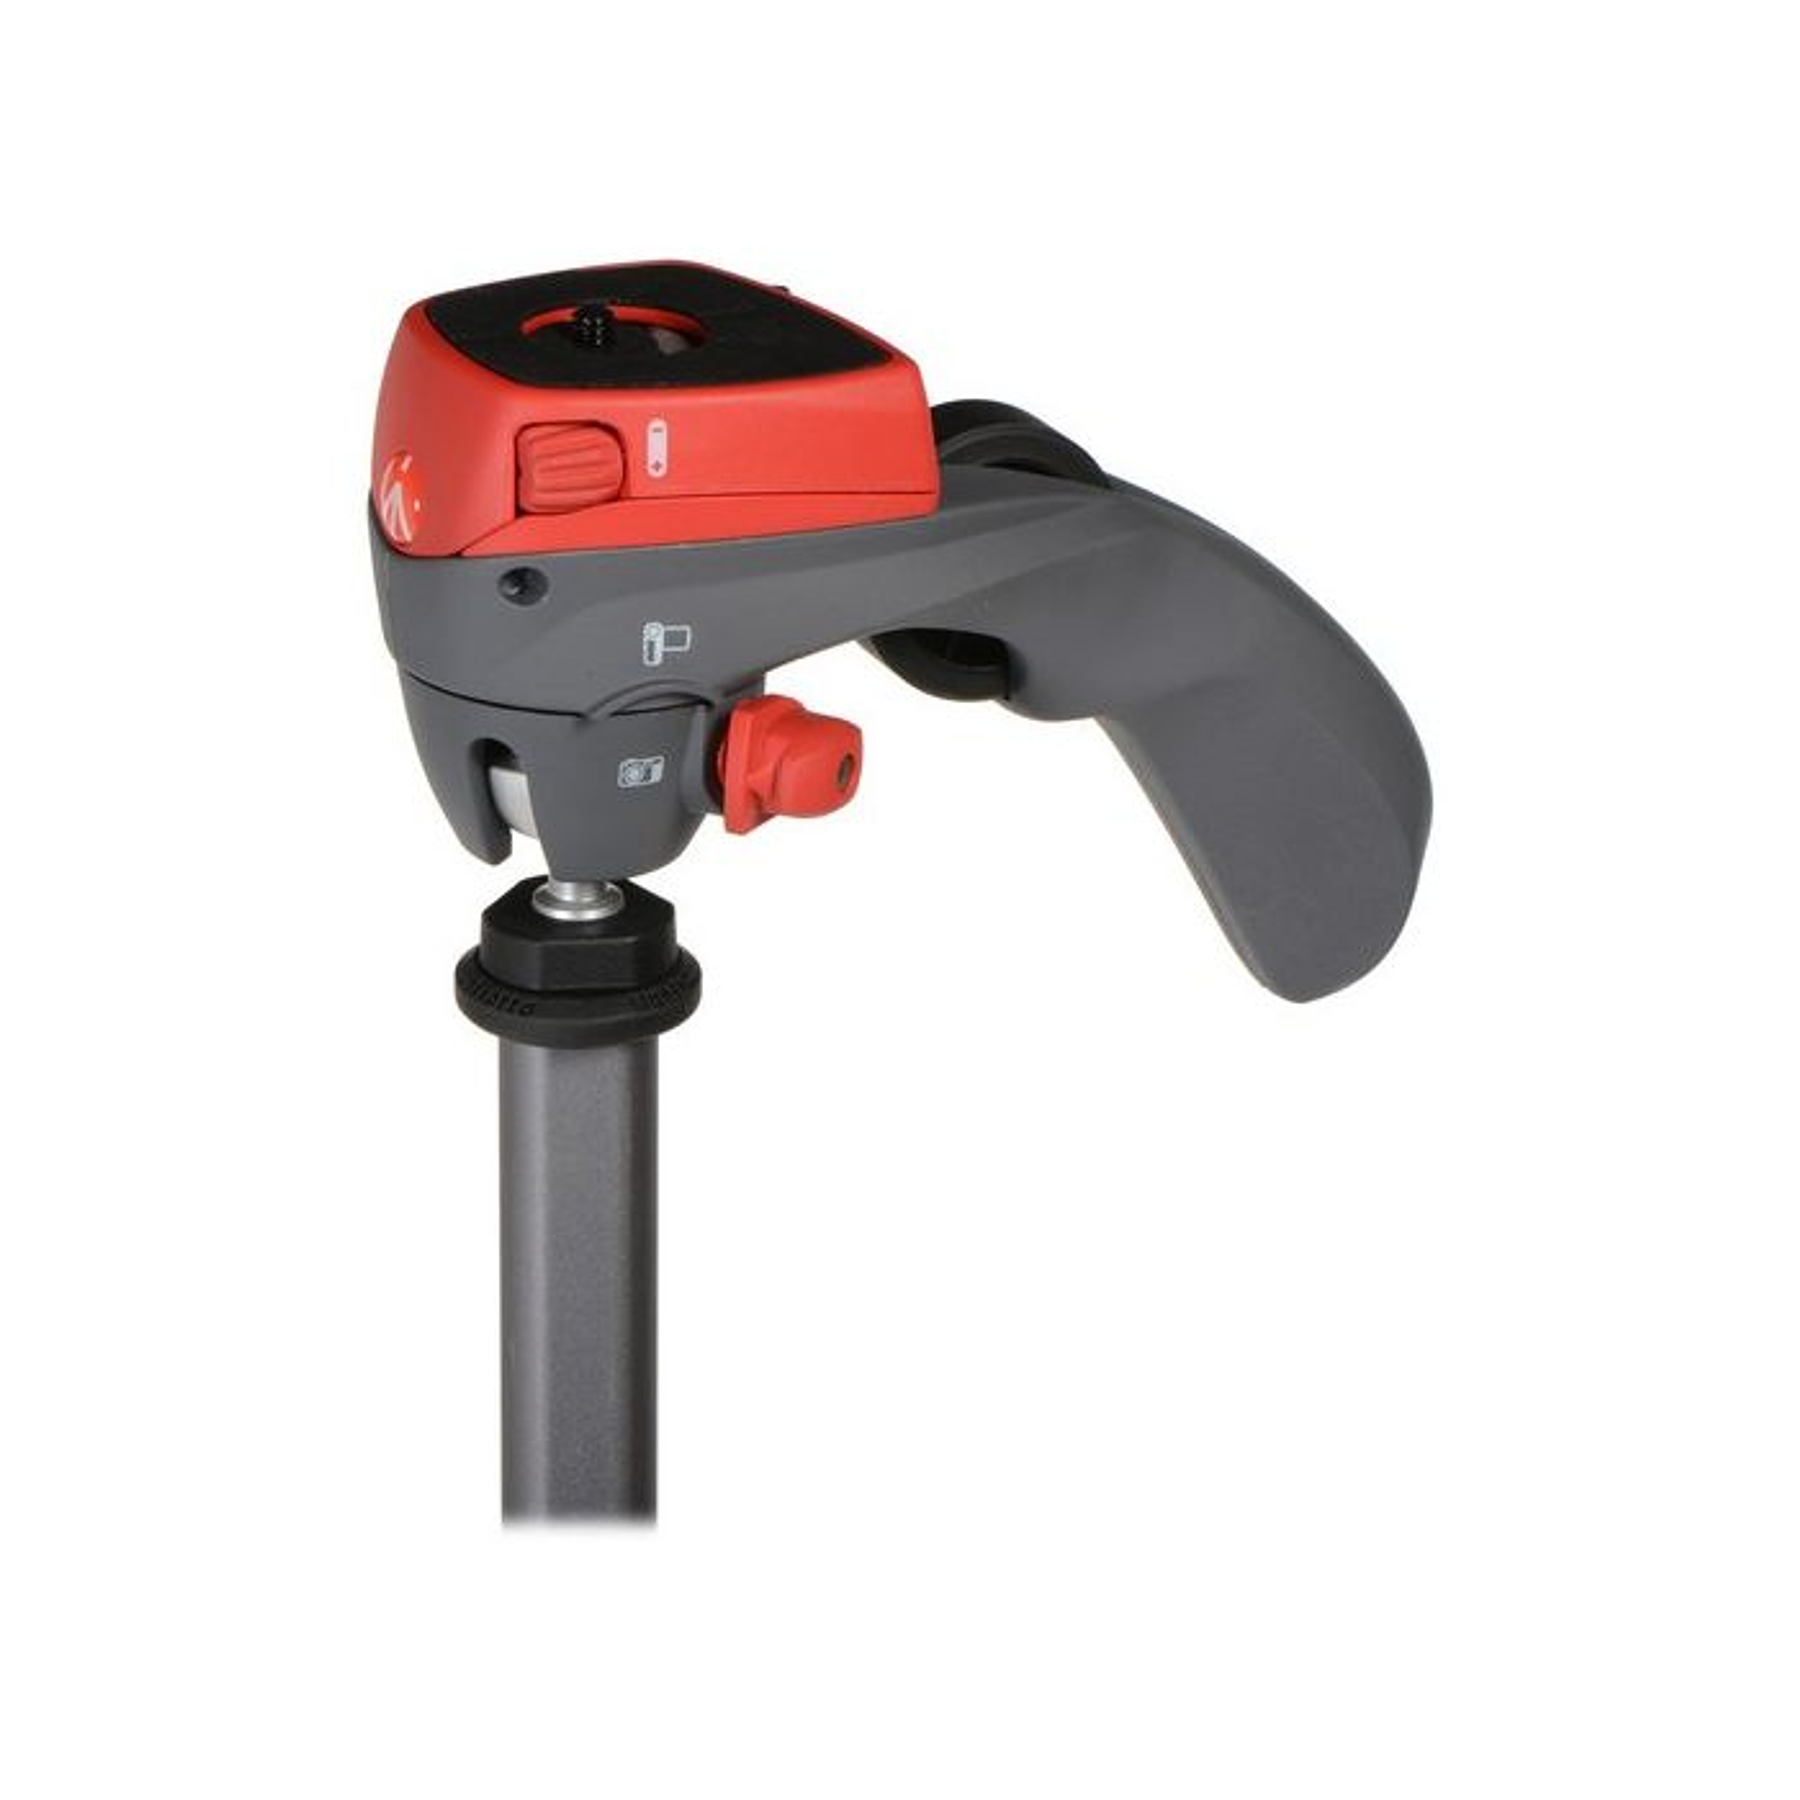 Tripode Manfrotto Compact Action rojo